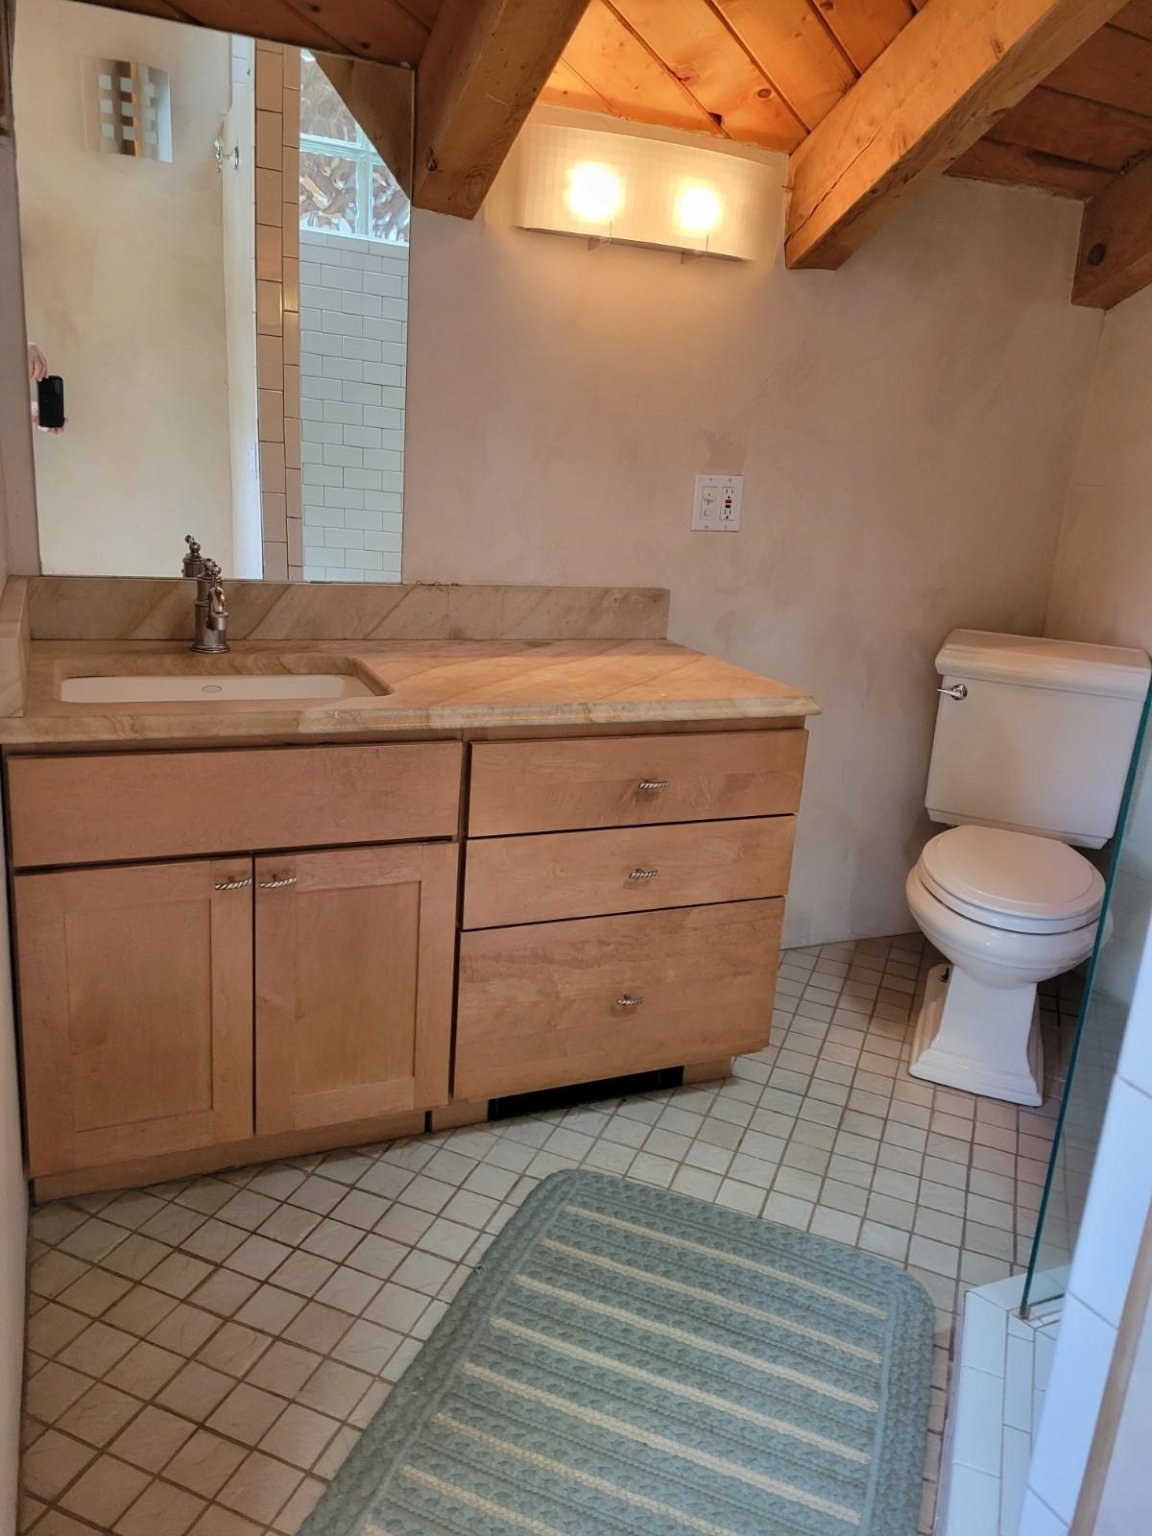 24 CALLE LILA, Santa Fe, New Mexico 87506, 2 Bedrooms Bedrooms, ,2 BathroomsBathrooms,Residential,For Sale,24 CALLE LILA,202104672